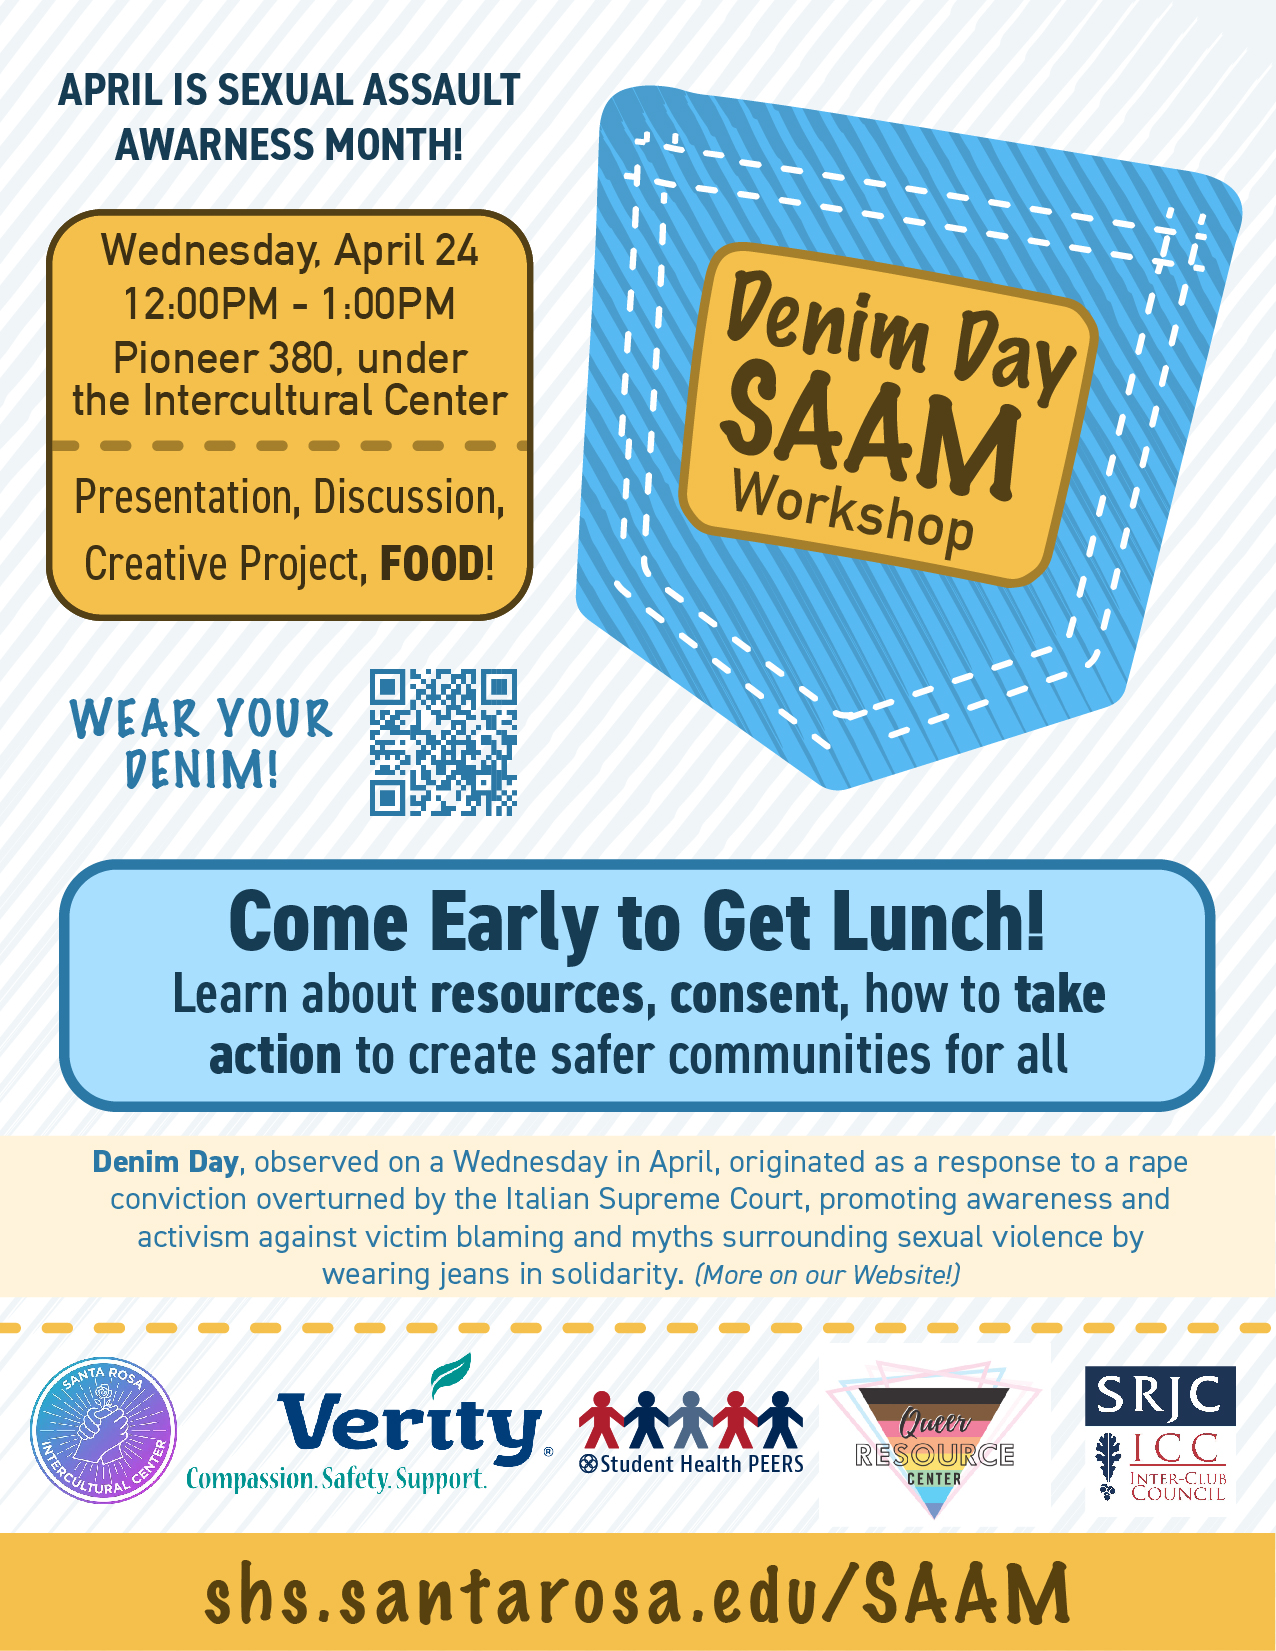 SAAM Workshop flyer featuring a denim pocket with a patch on it that reads Denim Day SAAM Workshop Wednesday, April 24. It notes: Learn about resources, consent, how to take action to create safer communities for all!